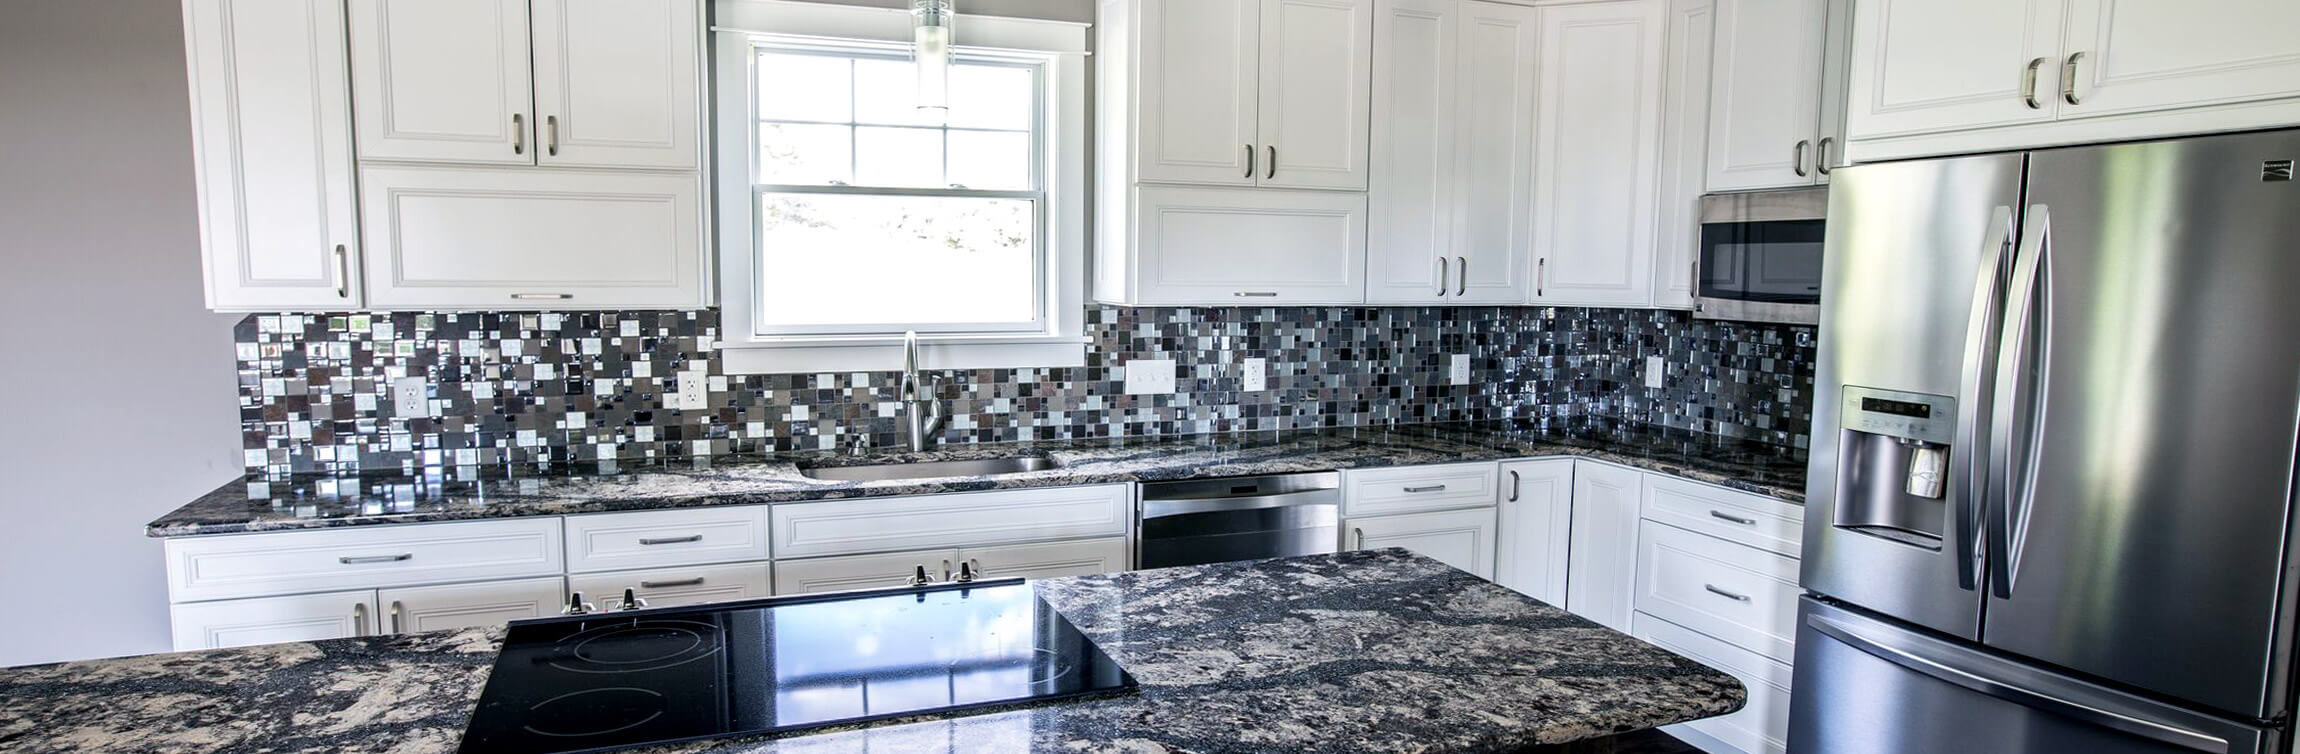 Custom Residential Kitchen featuring solid wood cabinets with a white finish, glass tile backsplash, stone countertops